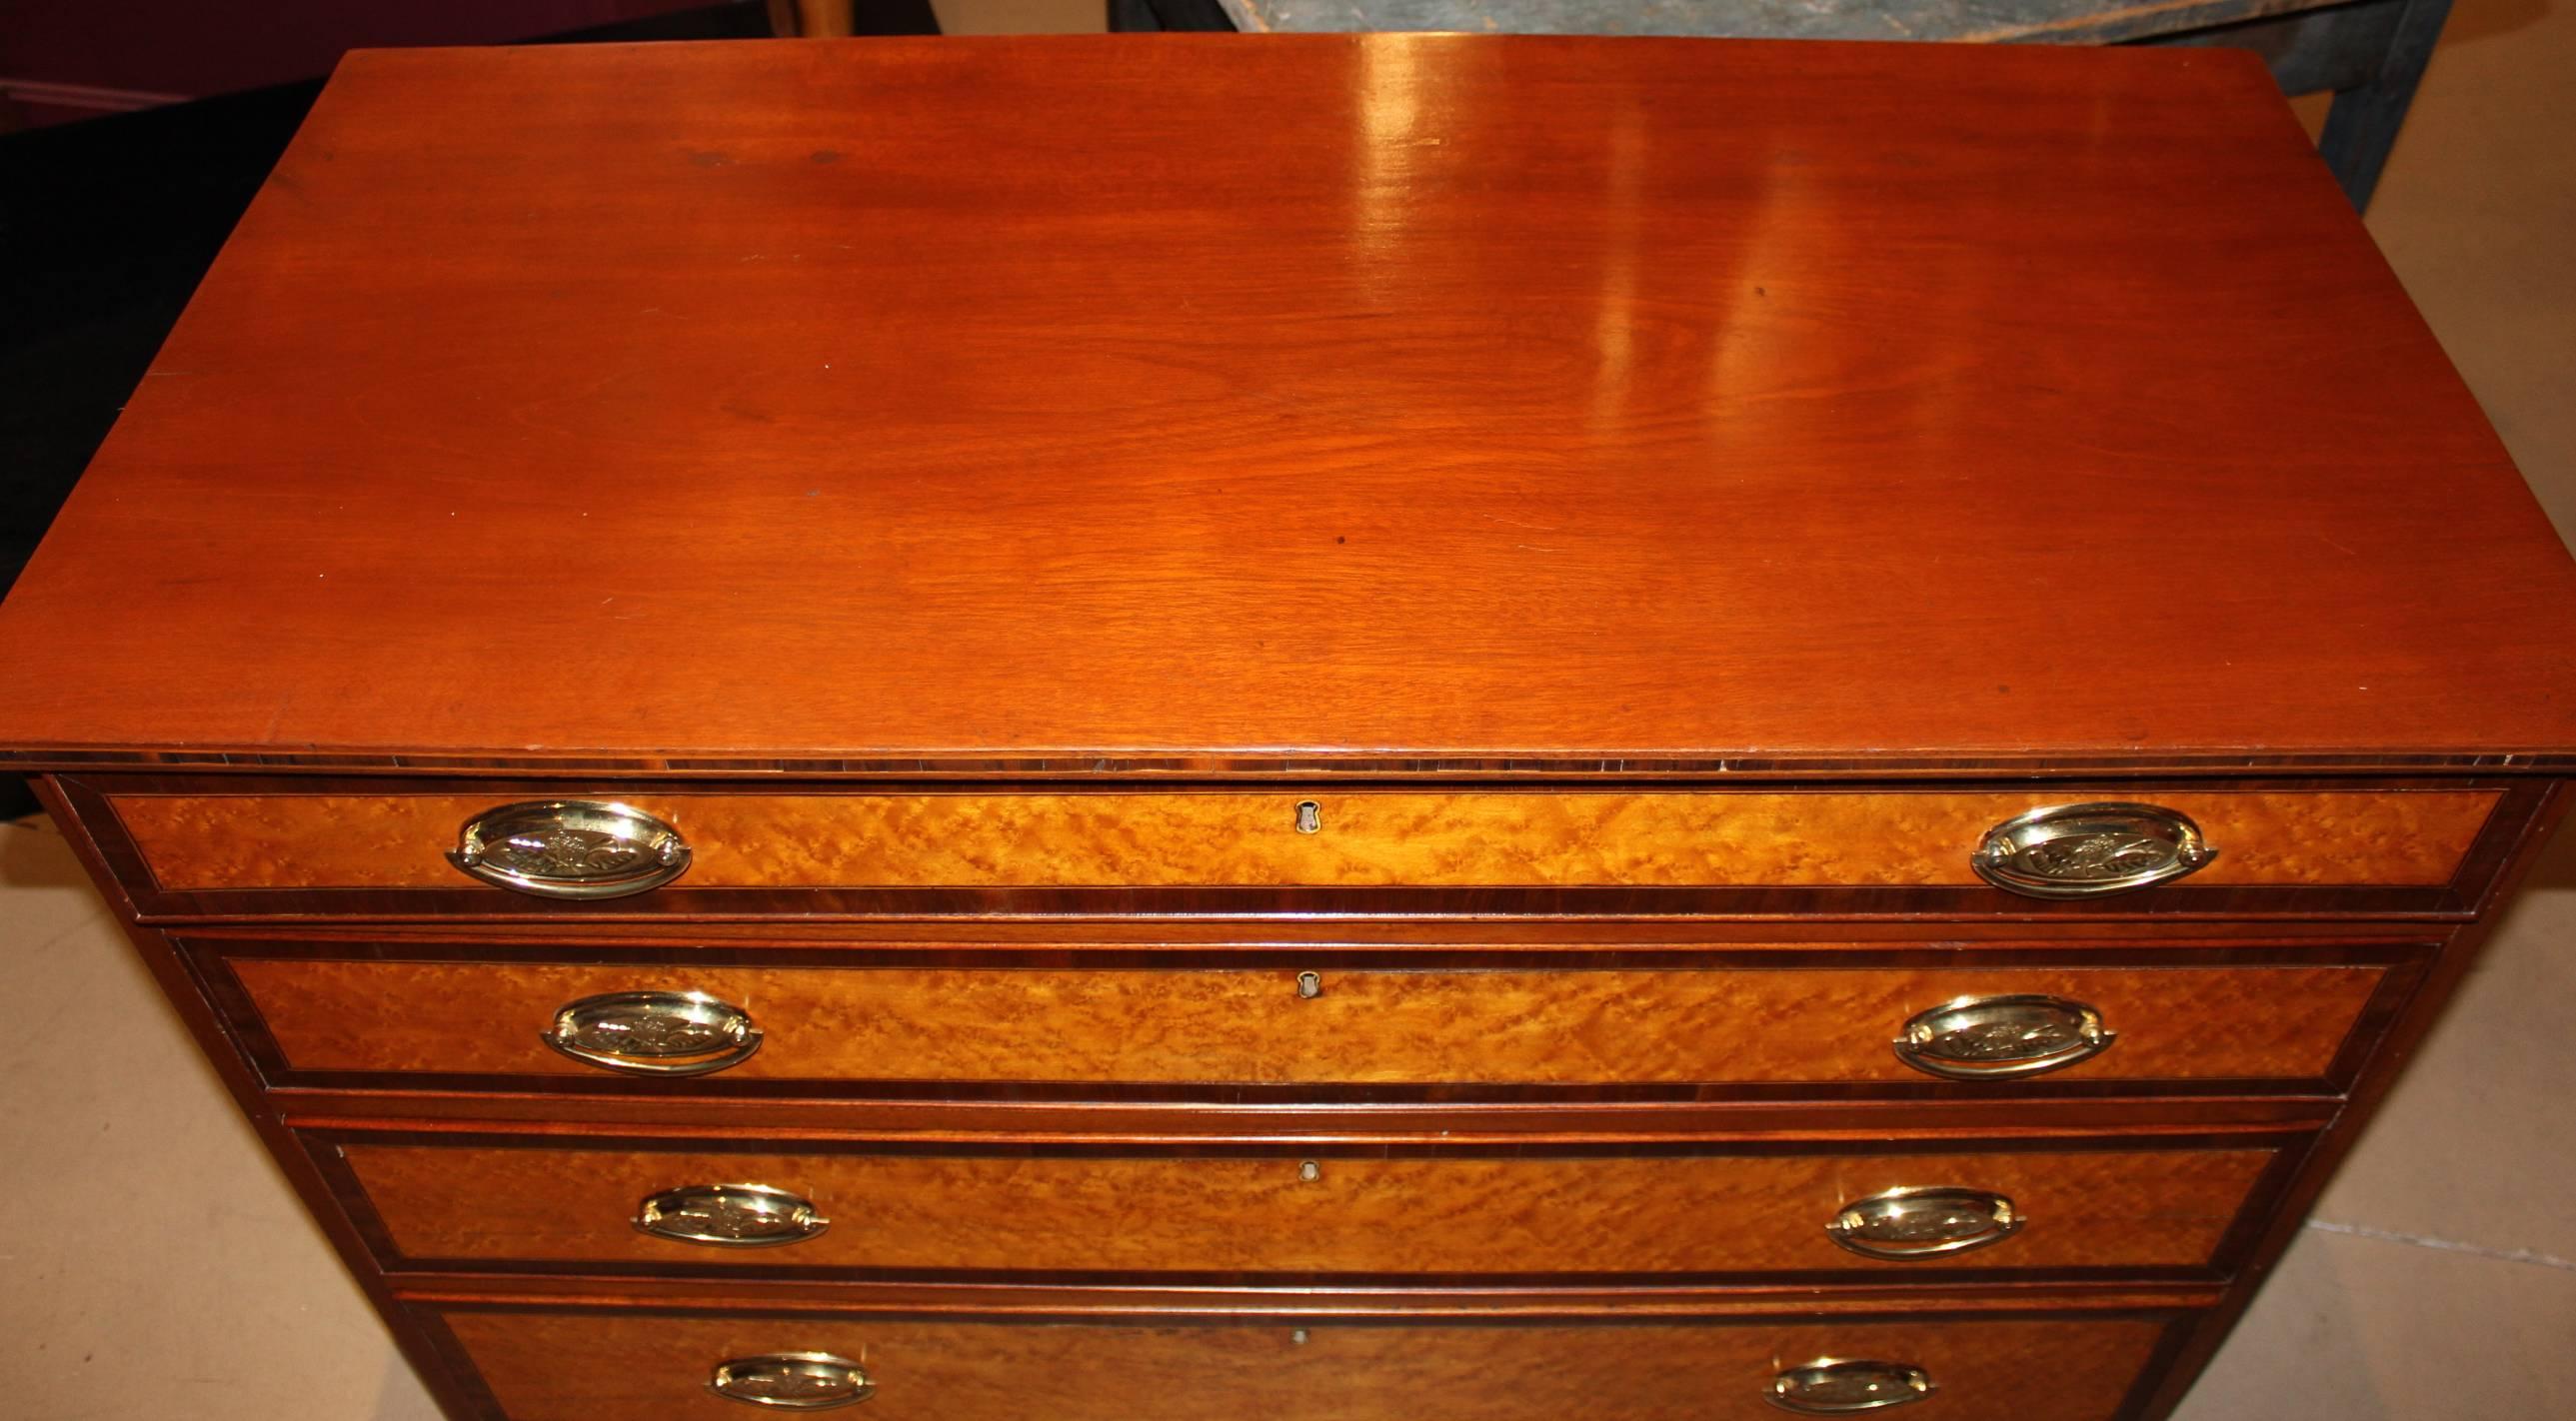 A fine Hepplewhite, federal period graduated four drawer chest of drawers with bird's-eye maple drawer fronts with banding. Cherry and mahogany with pine secondary woods. Case nicely raised by well proportioned French feet and simple line inlay on